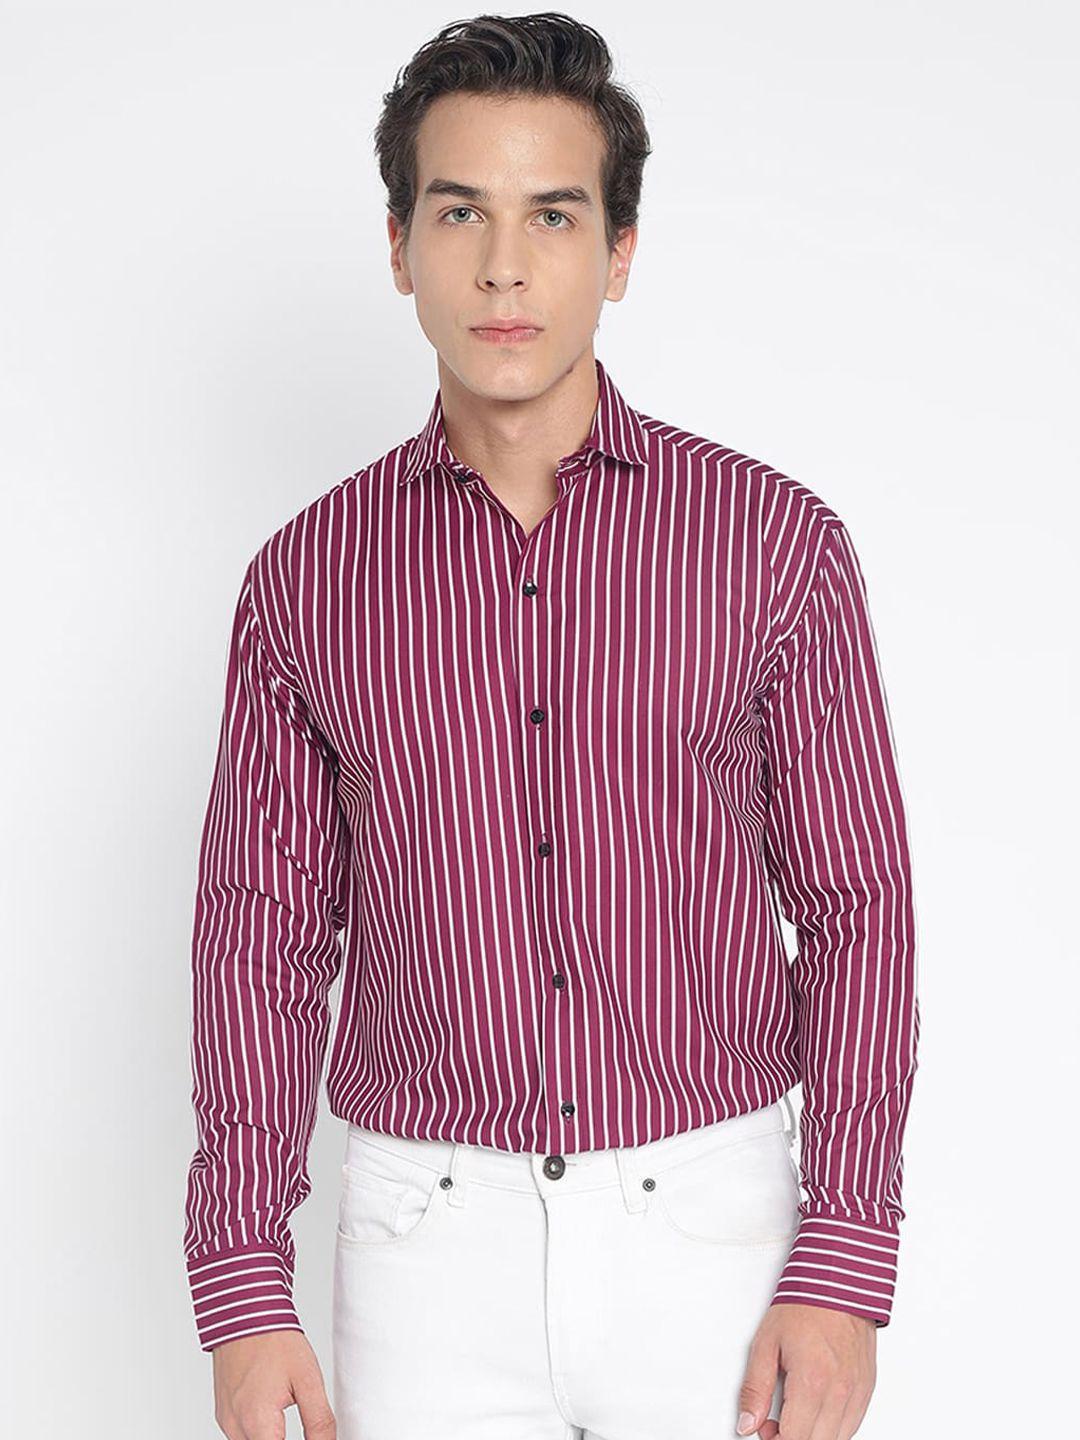 colorwings striped comfort slim fit party shirt